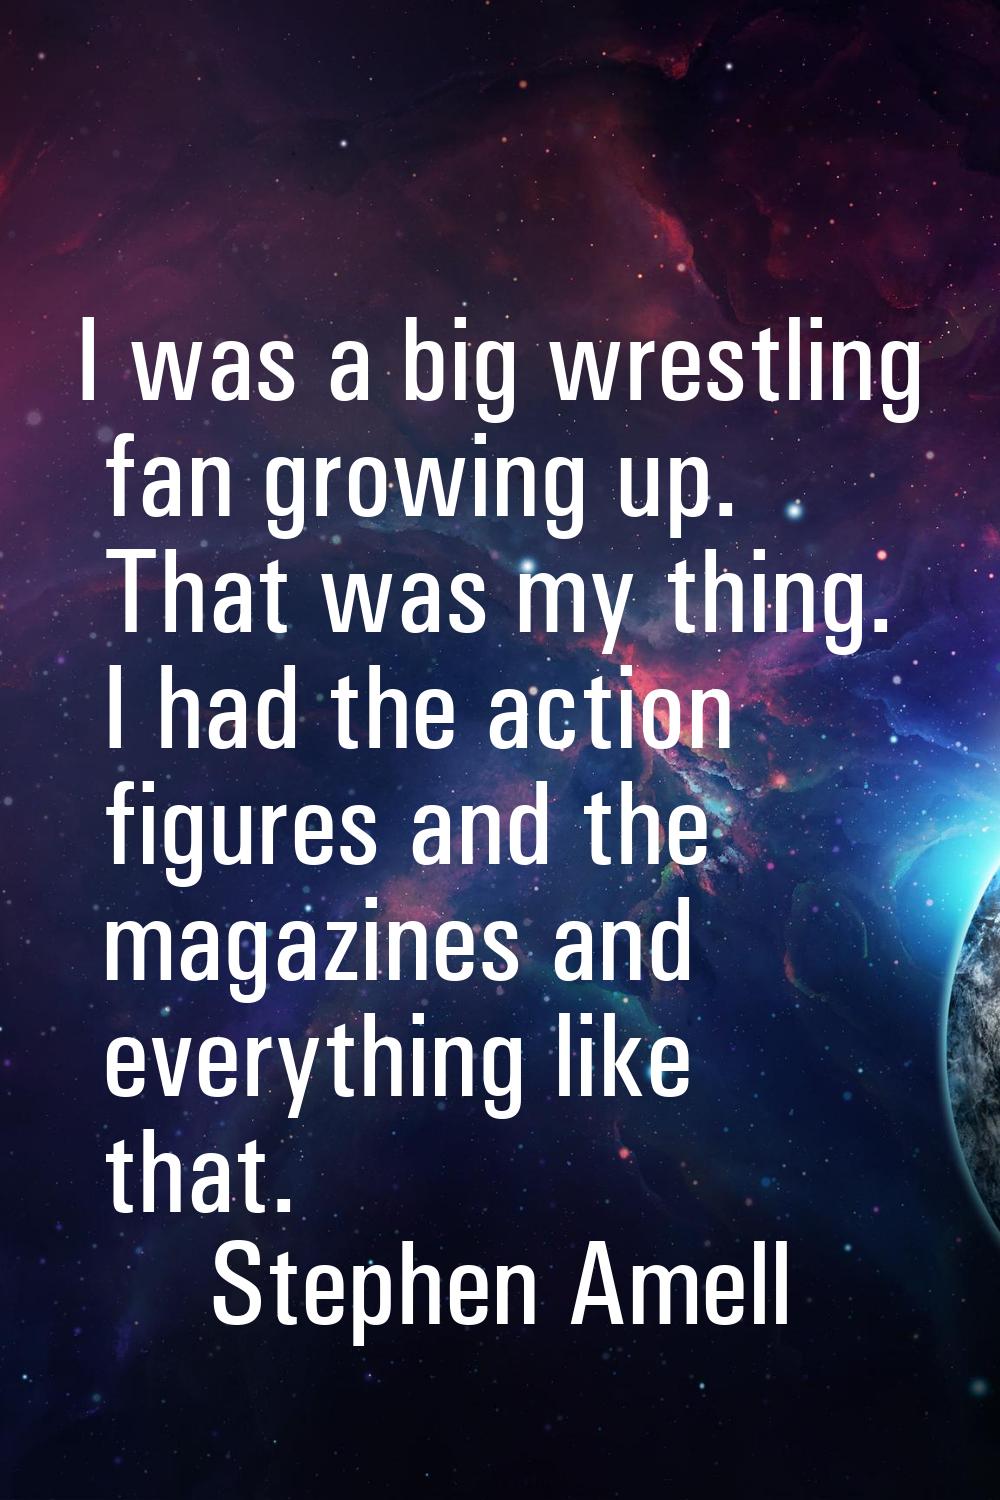 I was a big wrestling fan growing up. That was my thing. I had the action figures and the magazines